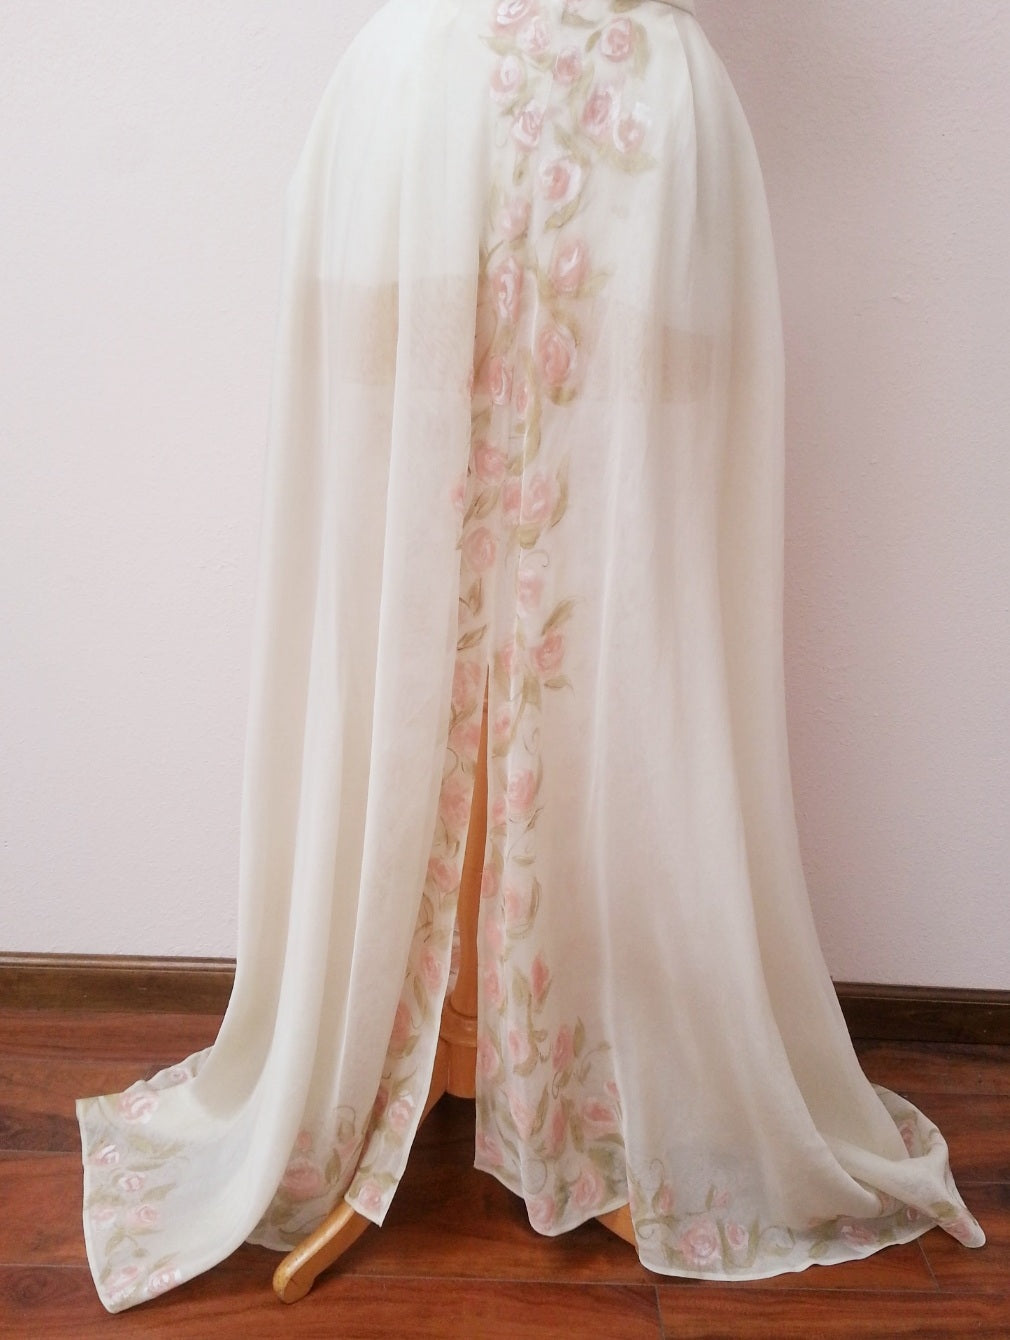 Handpainted bridal skirt with roses